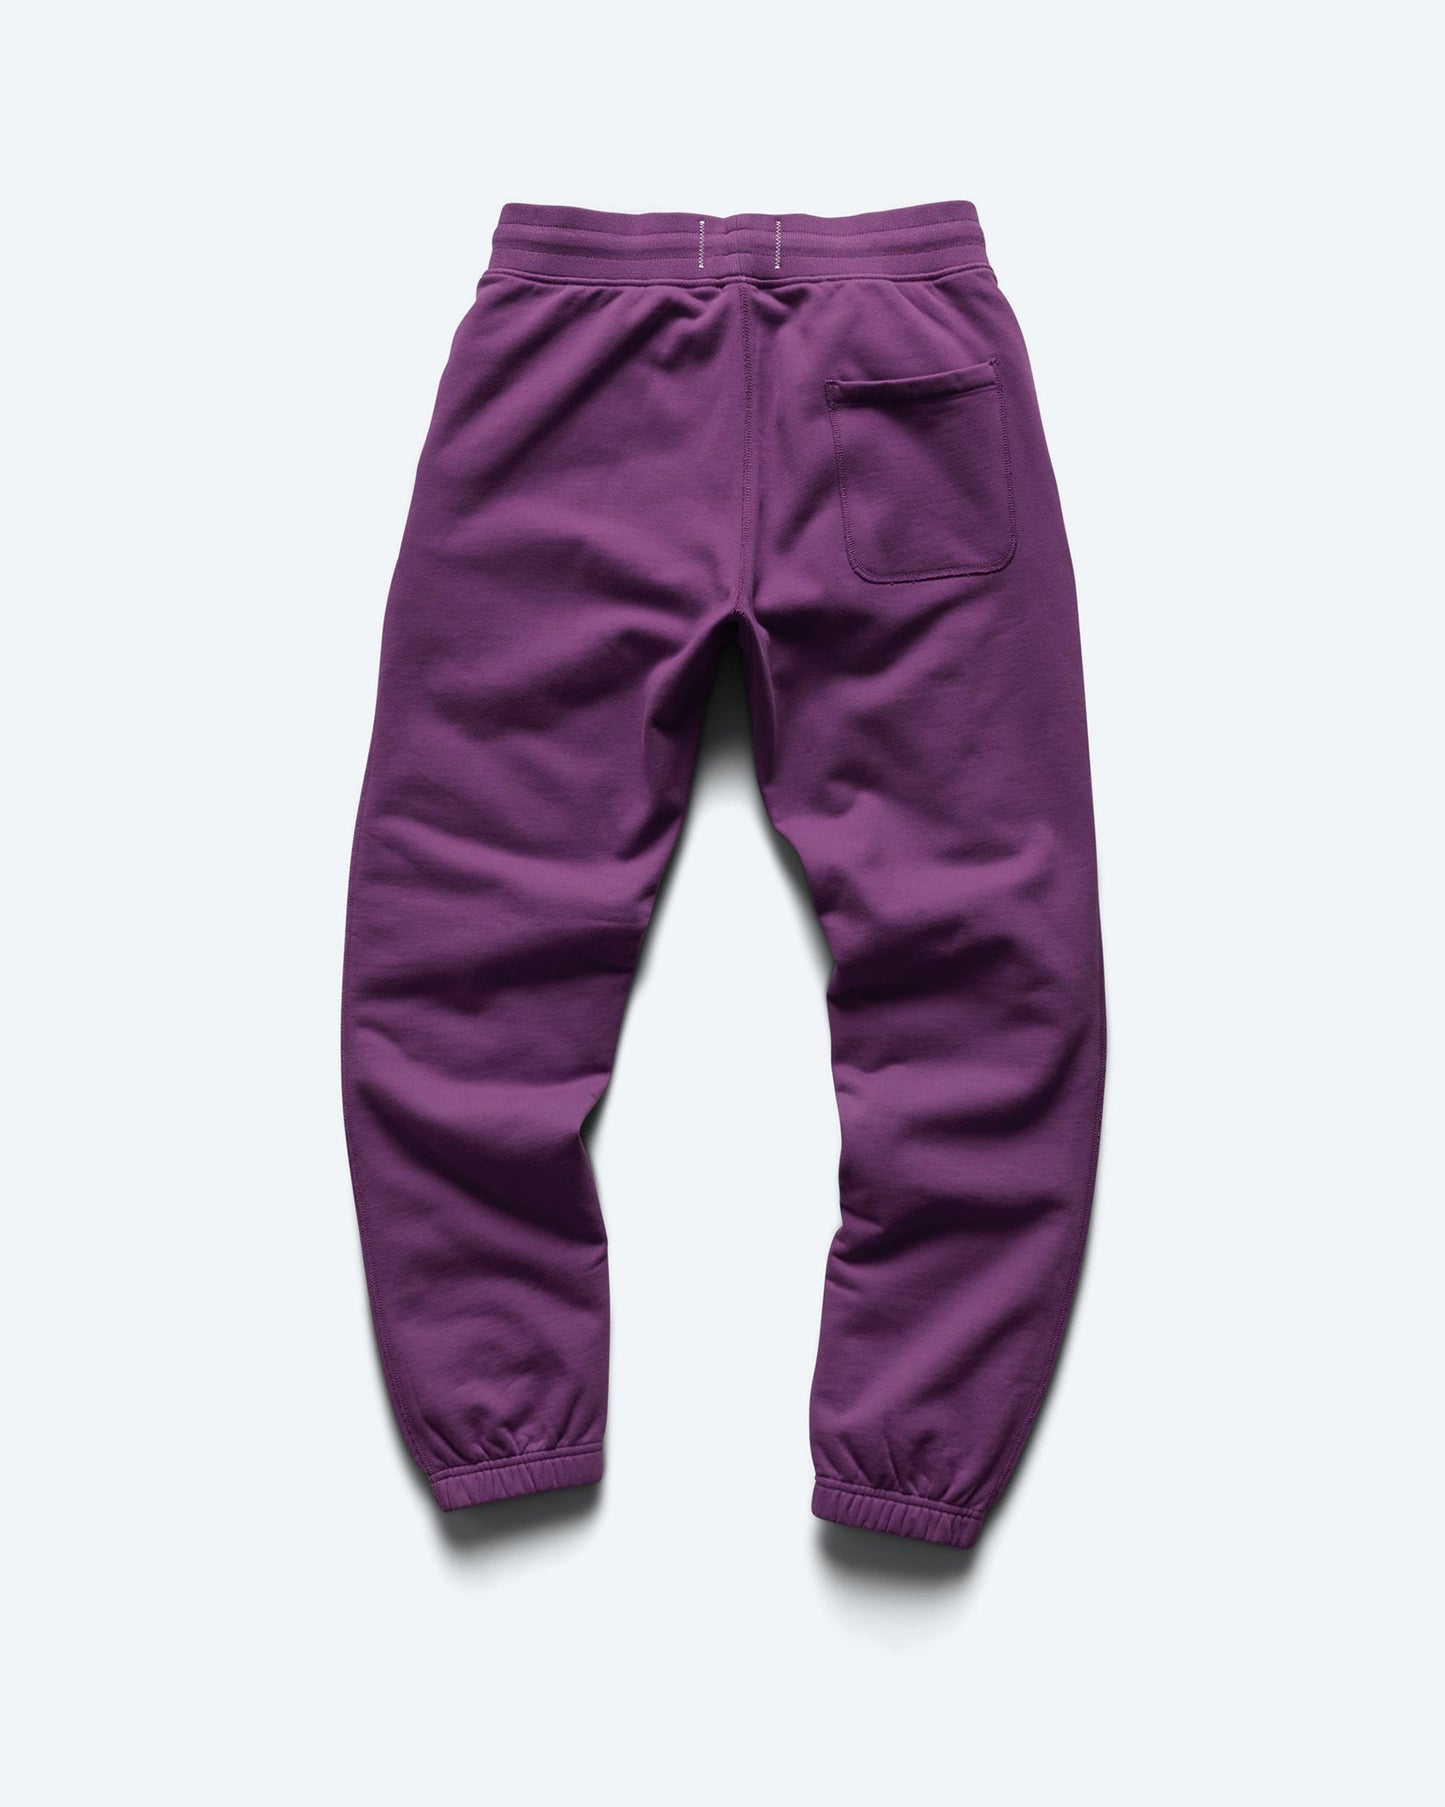 Midweight Terry Cuffed Sweatpant